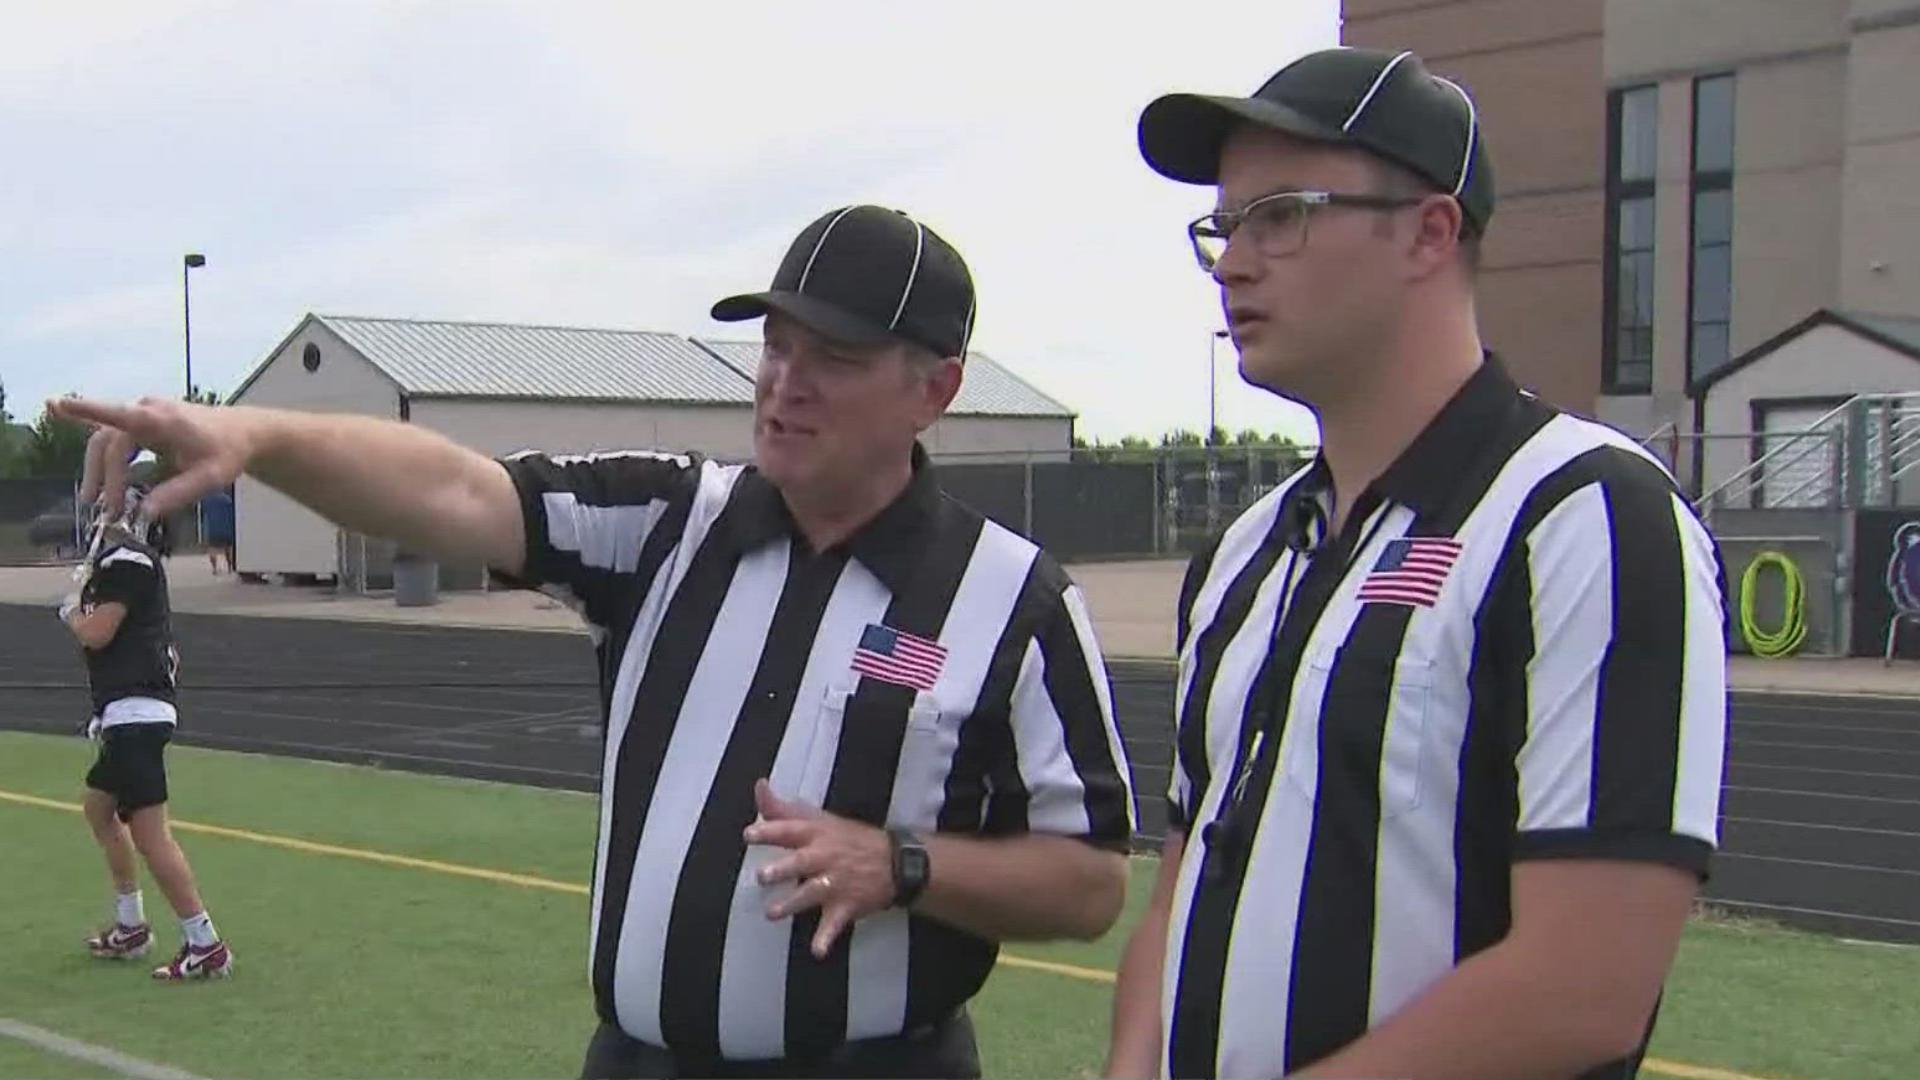 Amid a shortage of high school referees in the Treasure Valley and nationwide, KTVB's Brady Frederick joined a group of trainees hoping to help on Friday nights.